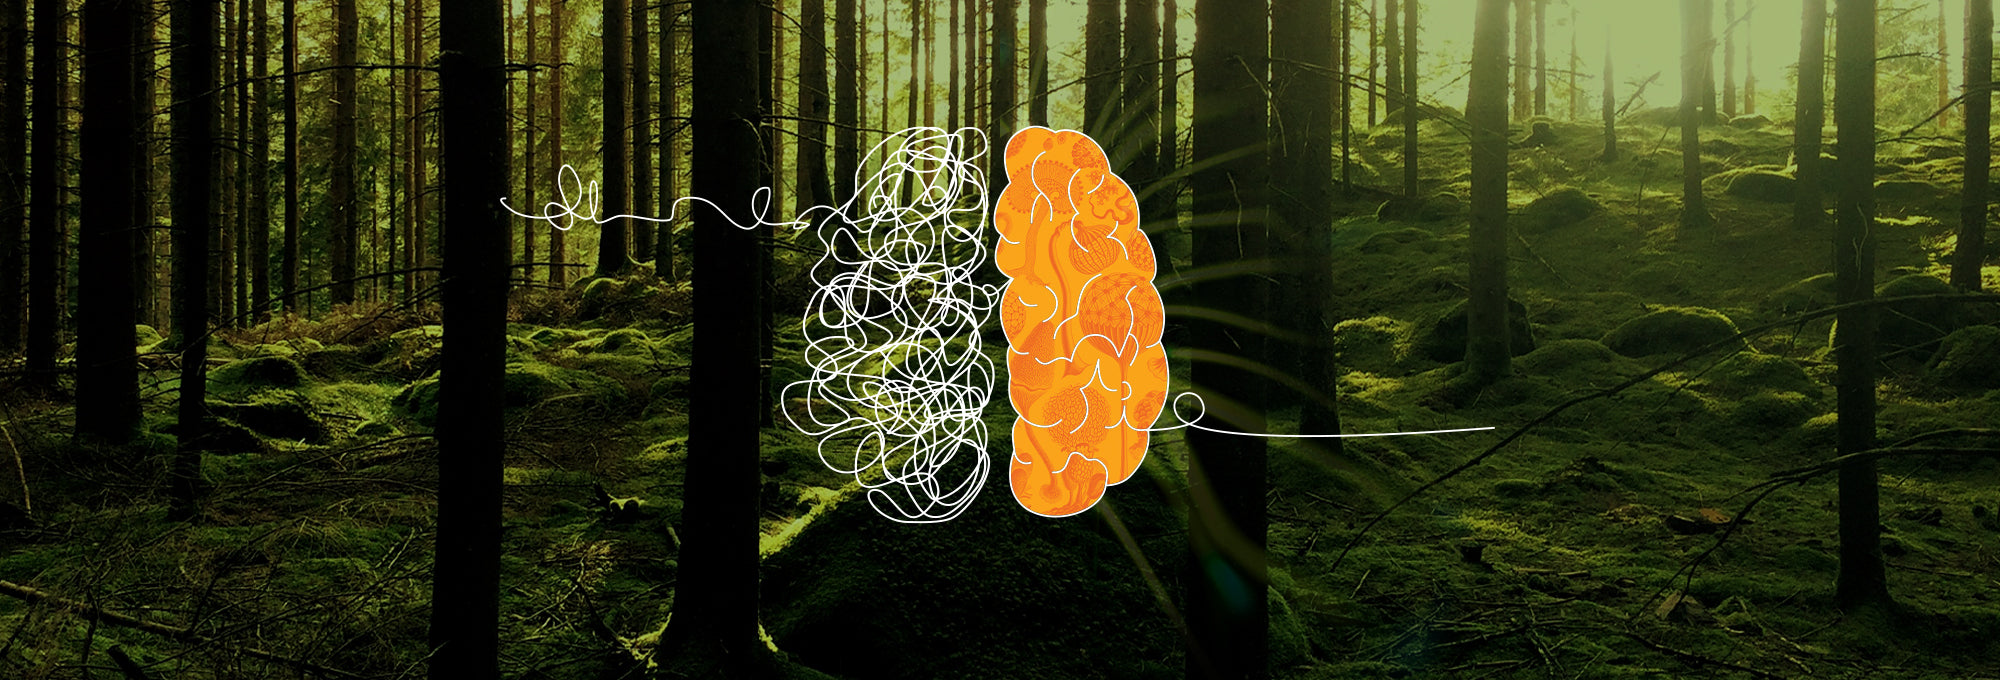 Lush forest and an illustration of a brain